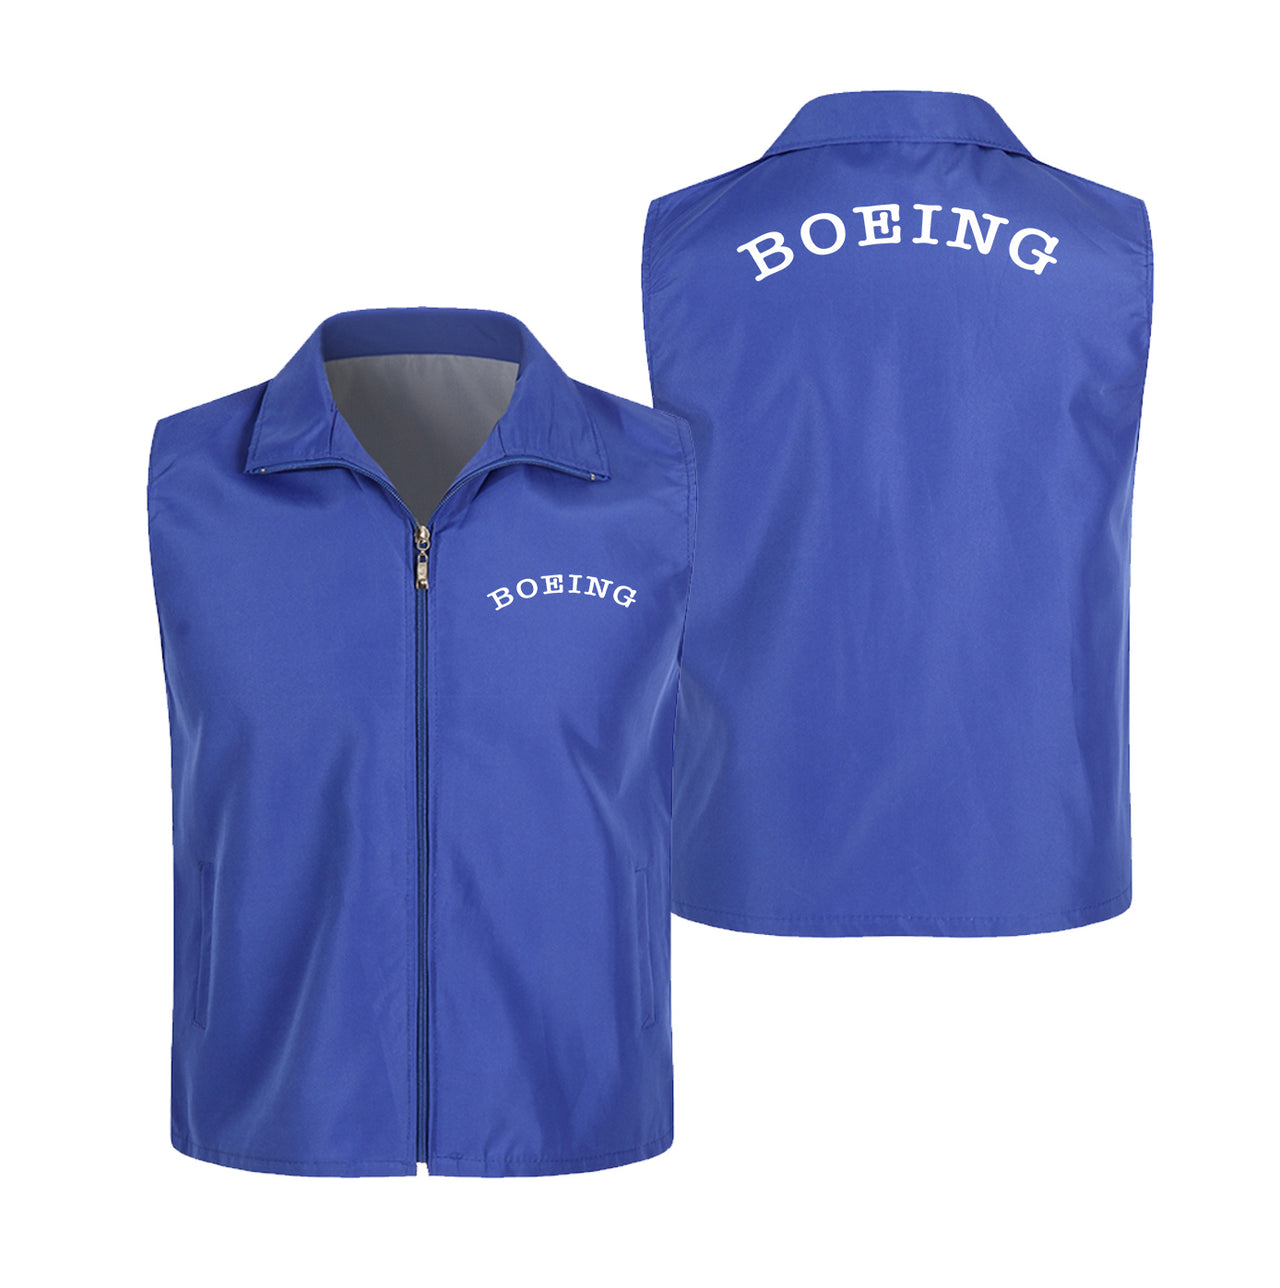 Special BOEING Text Designed Thin Style Vests